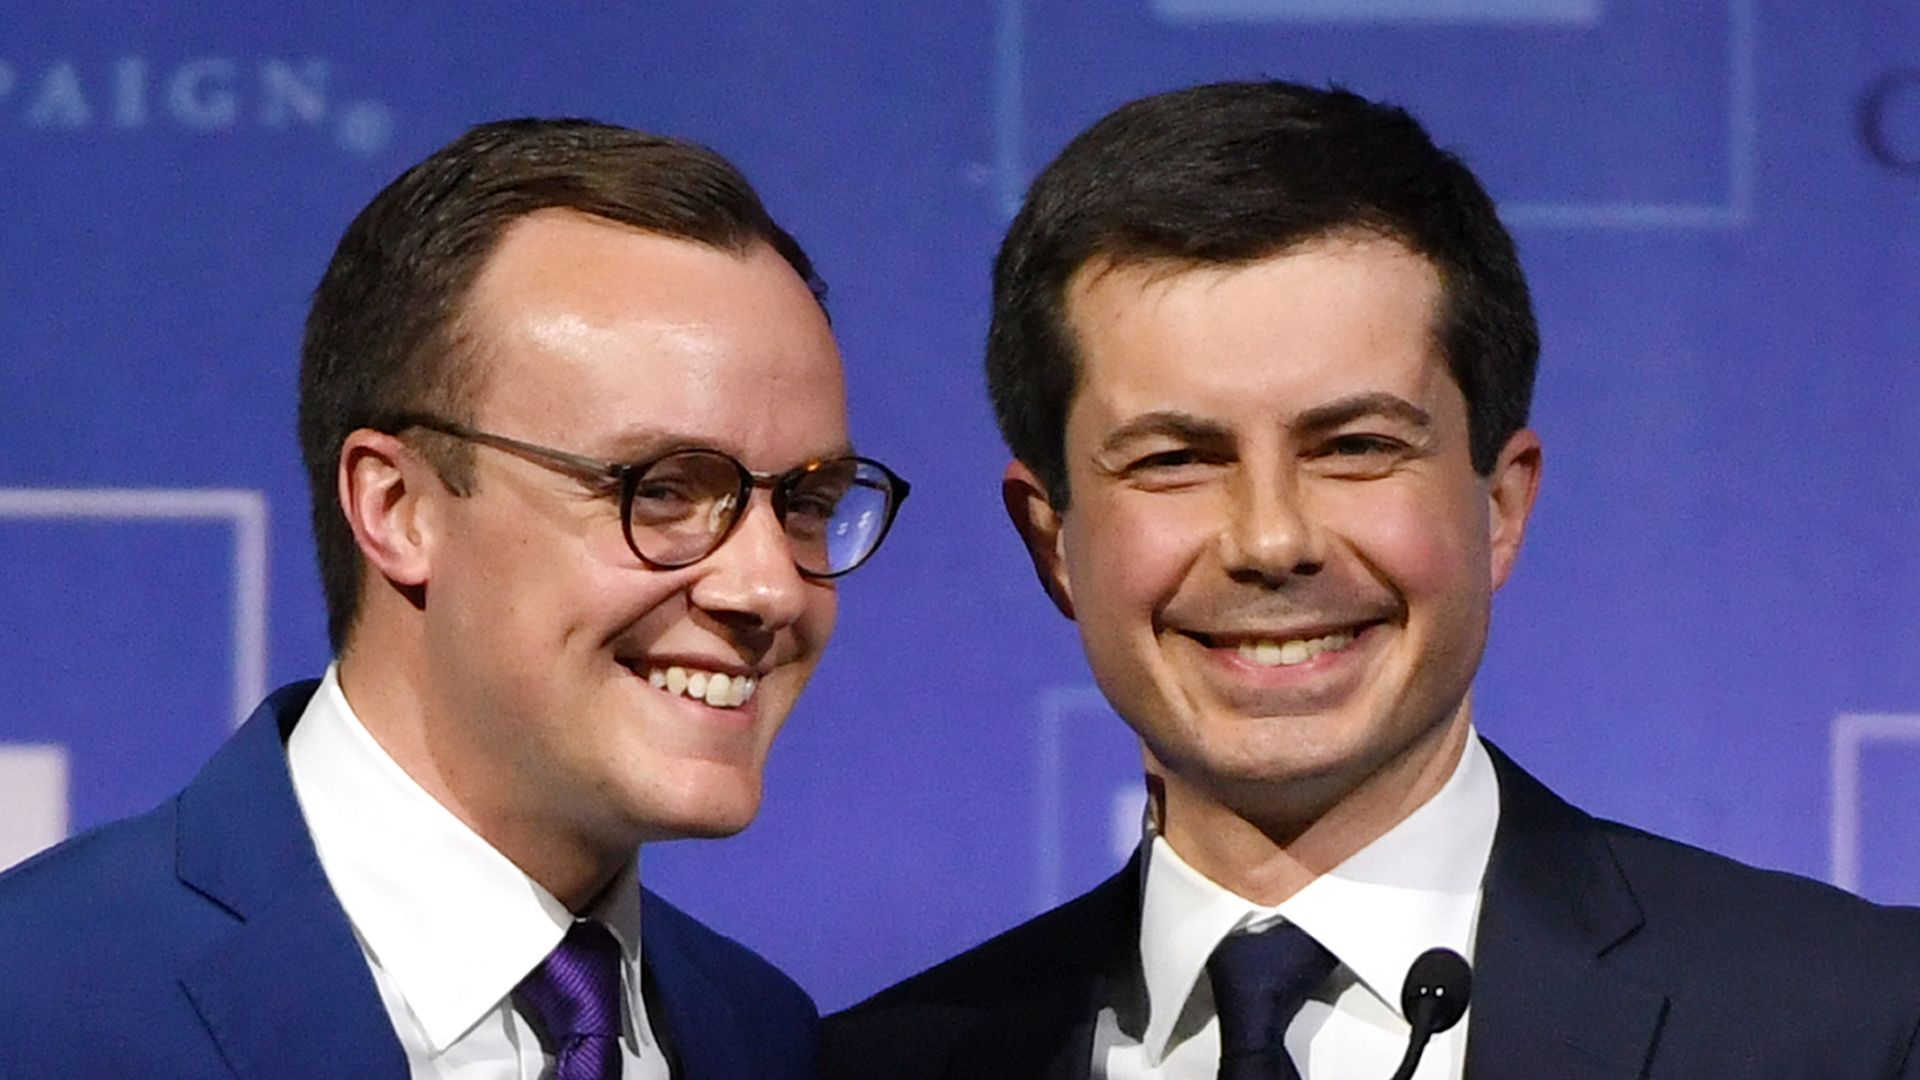 Pete Buttigieg and his husband have $130,000 in college debt - Axios